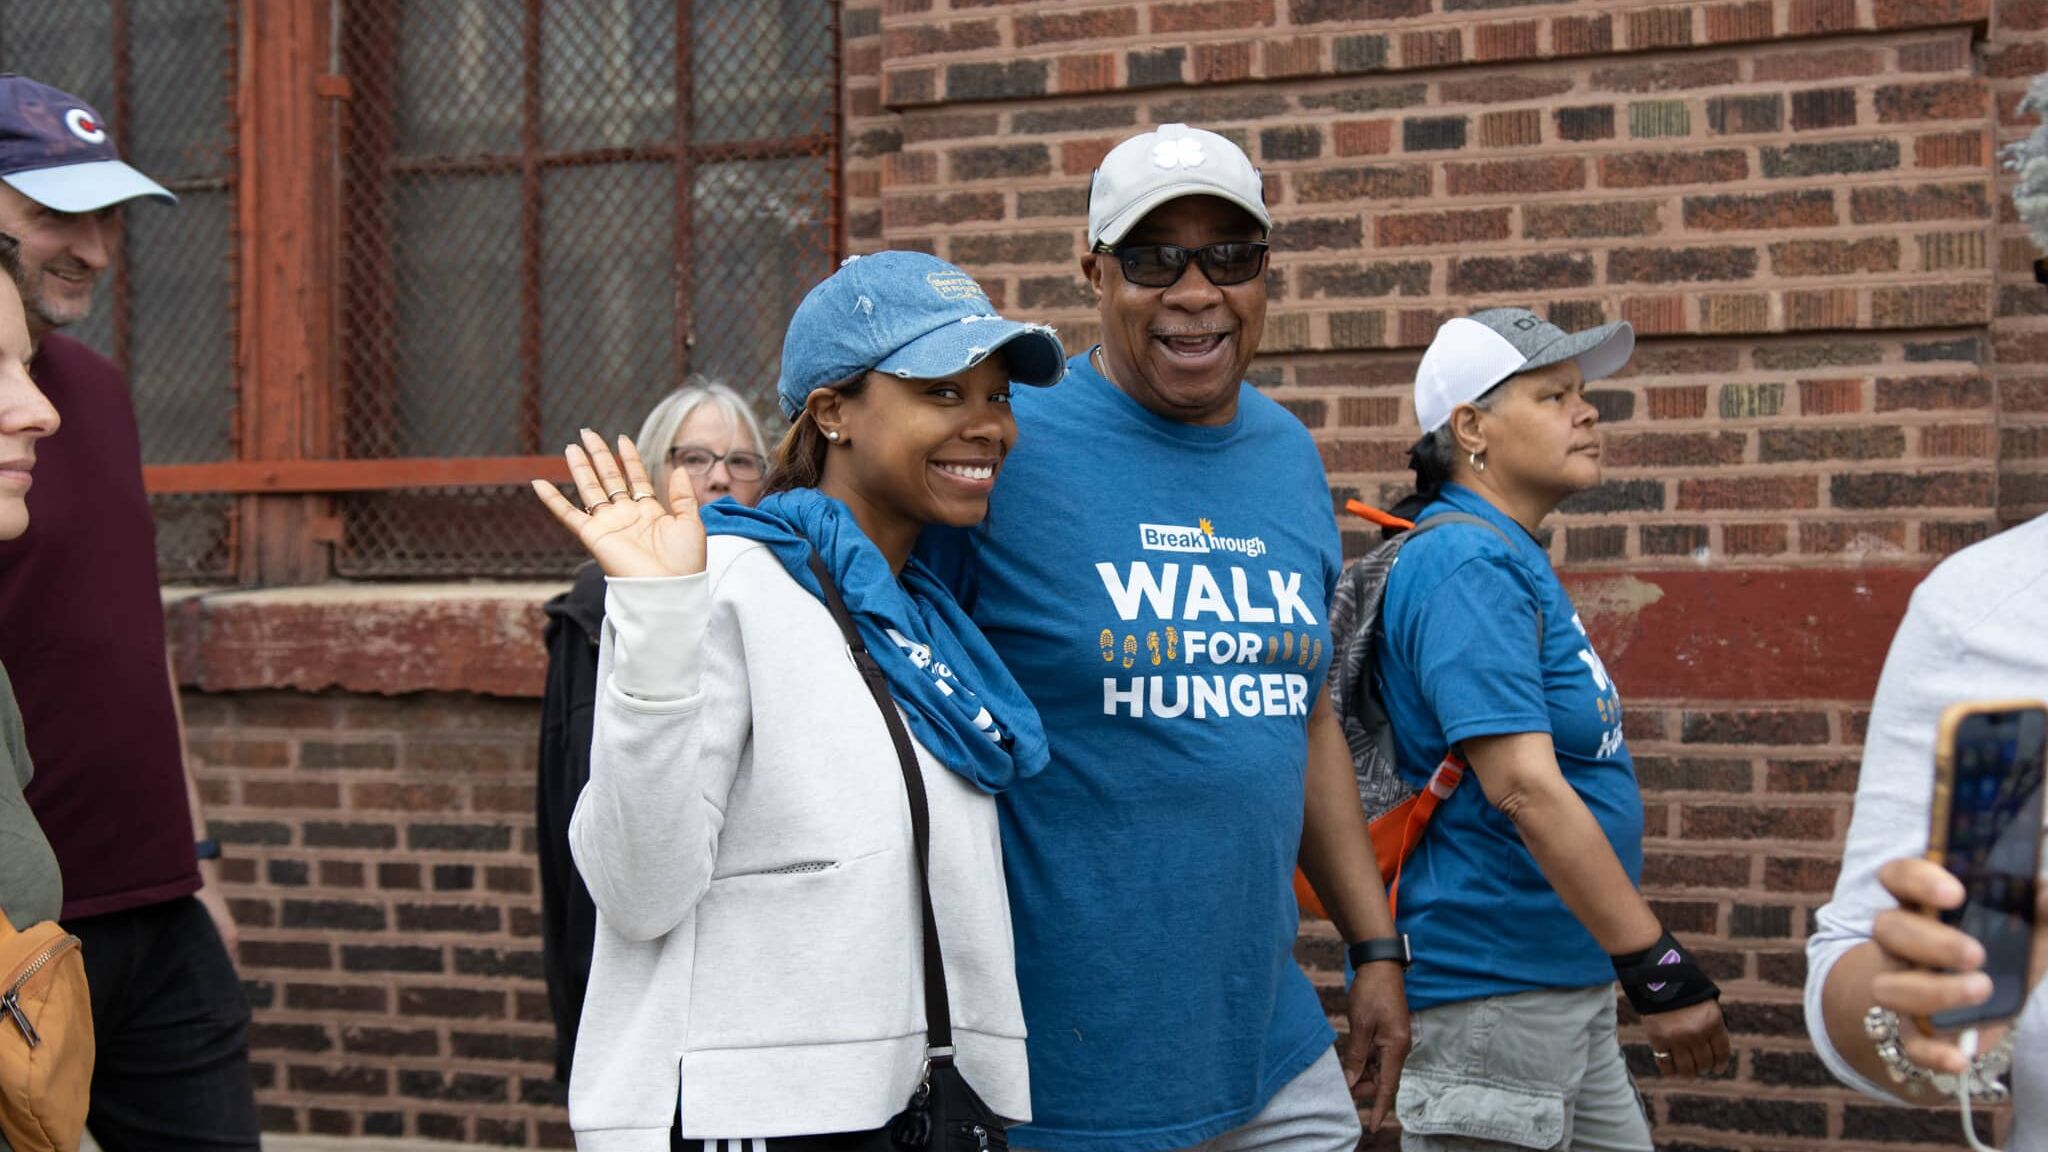 More Than 600 People Participate in Walk for Hunger 3